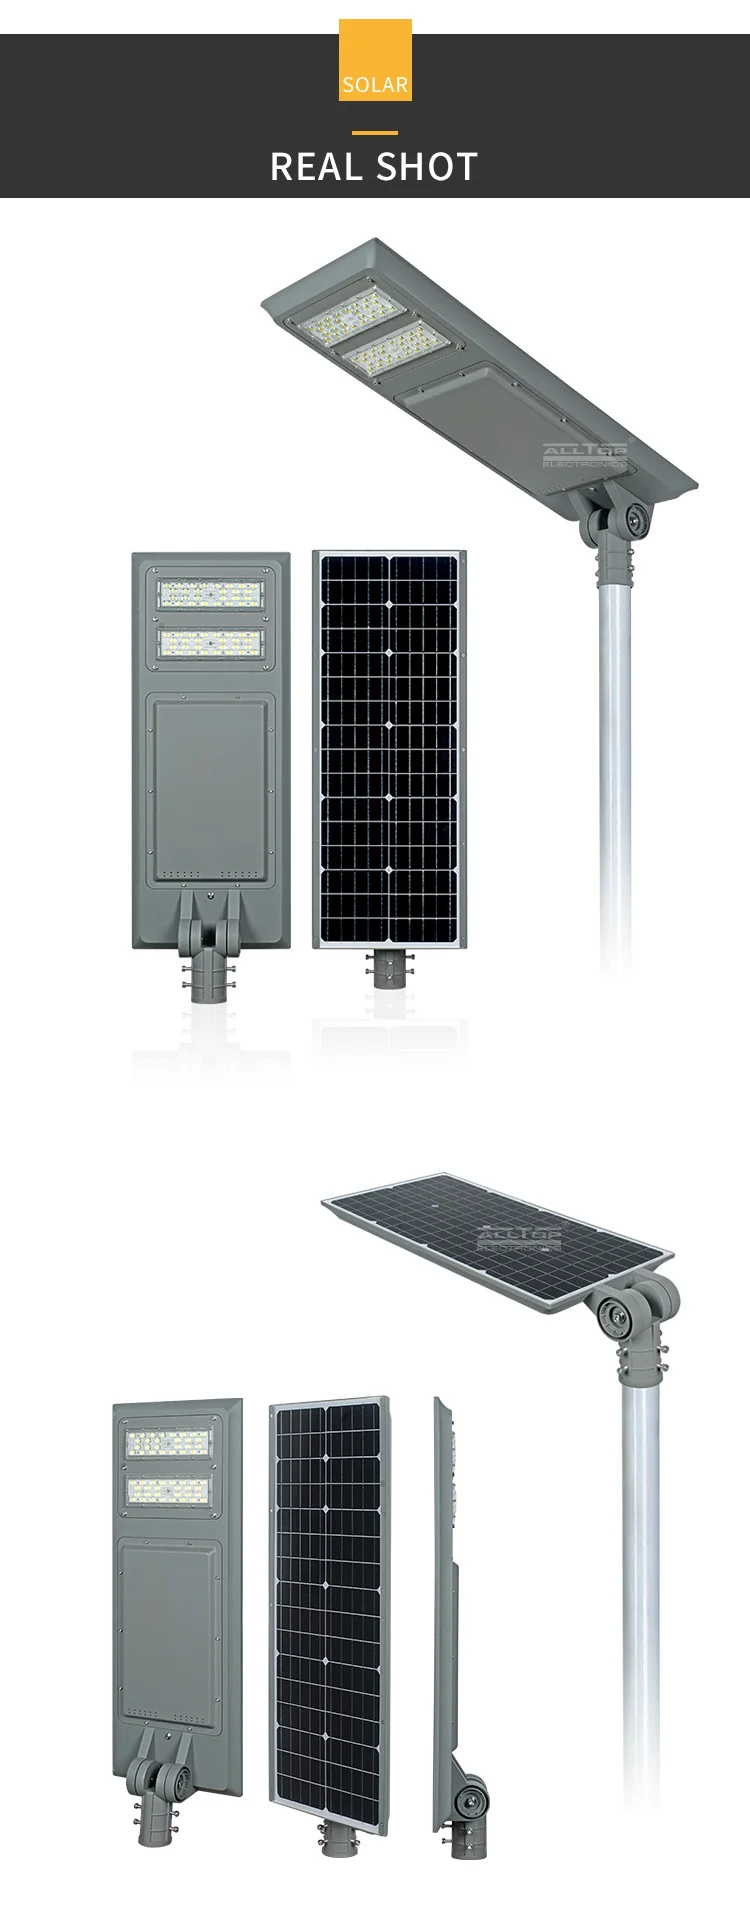 ALLTOP High quality waterproof ip65 outdoor garden all in one 40 60 100 w solar led street light